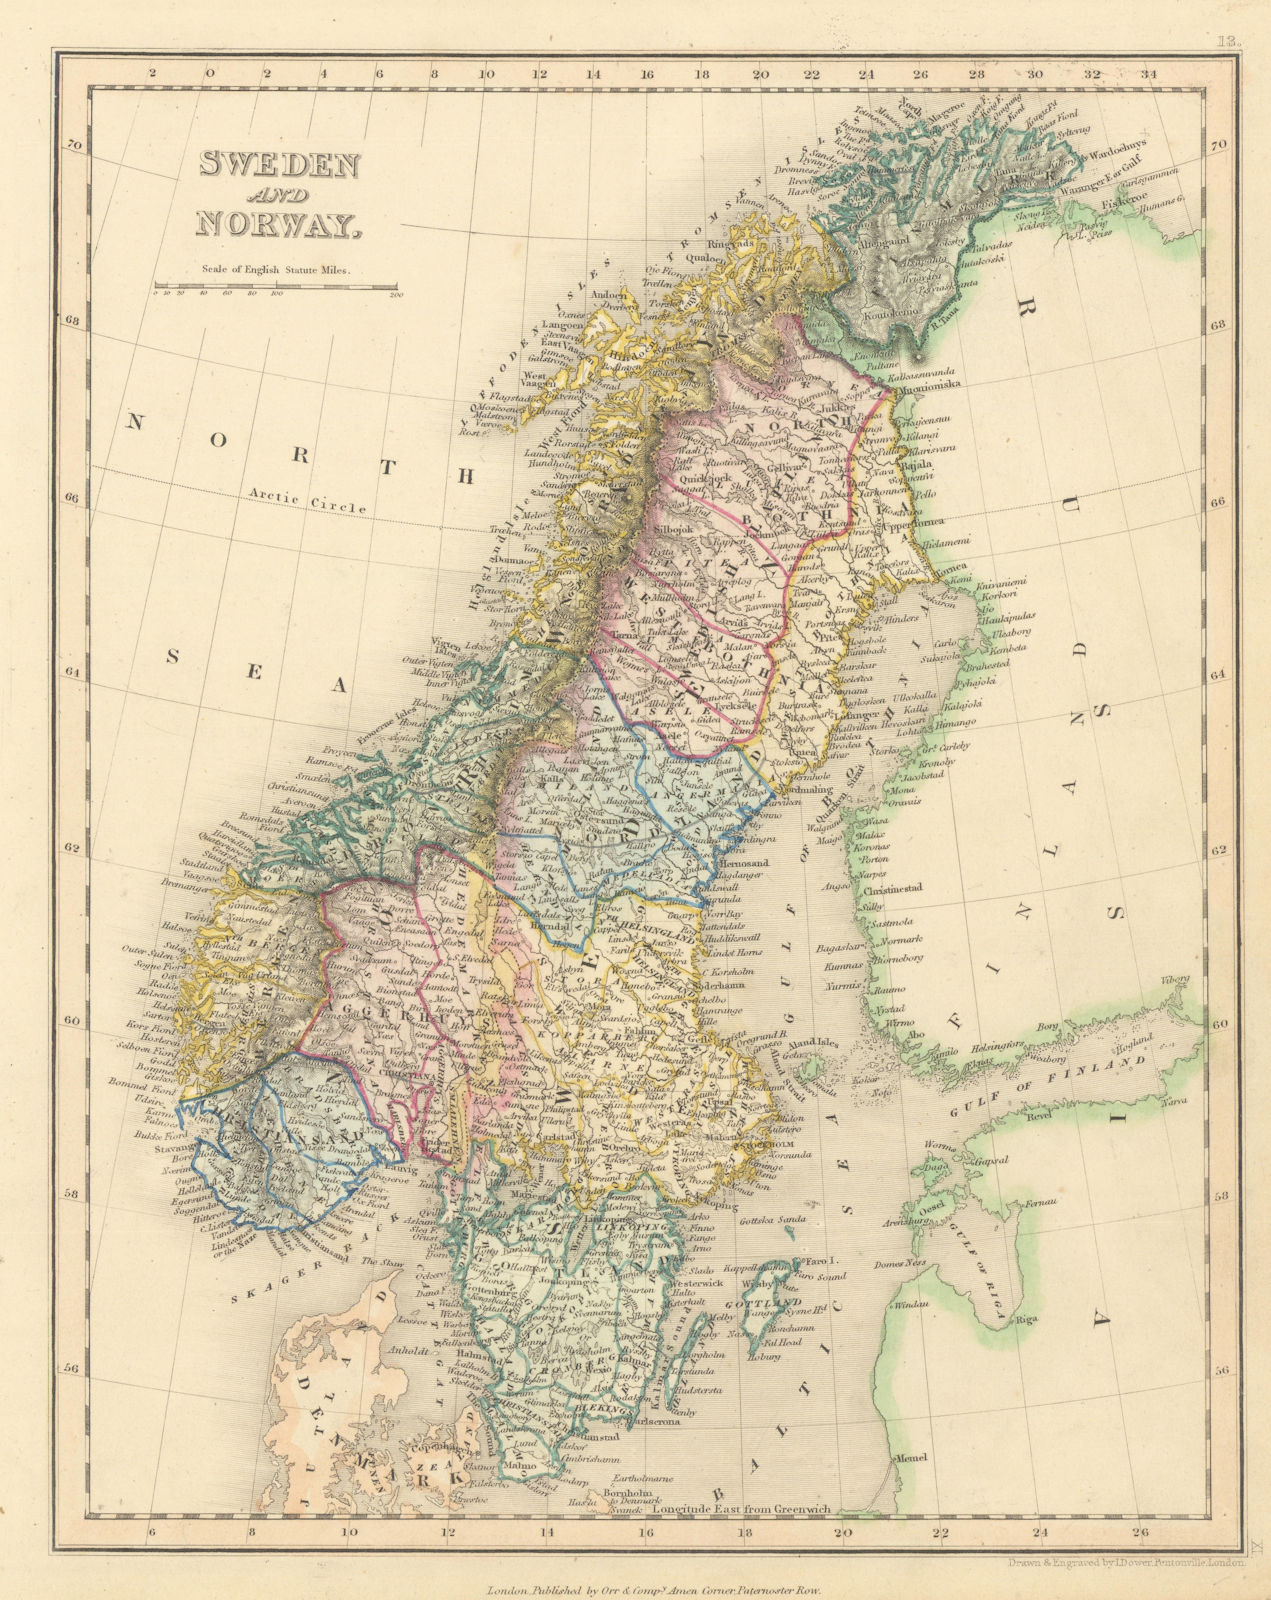 Sweden and Norway by John Dower. Scandinavia 1845 old antique map plan chart